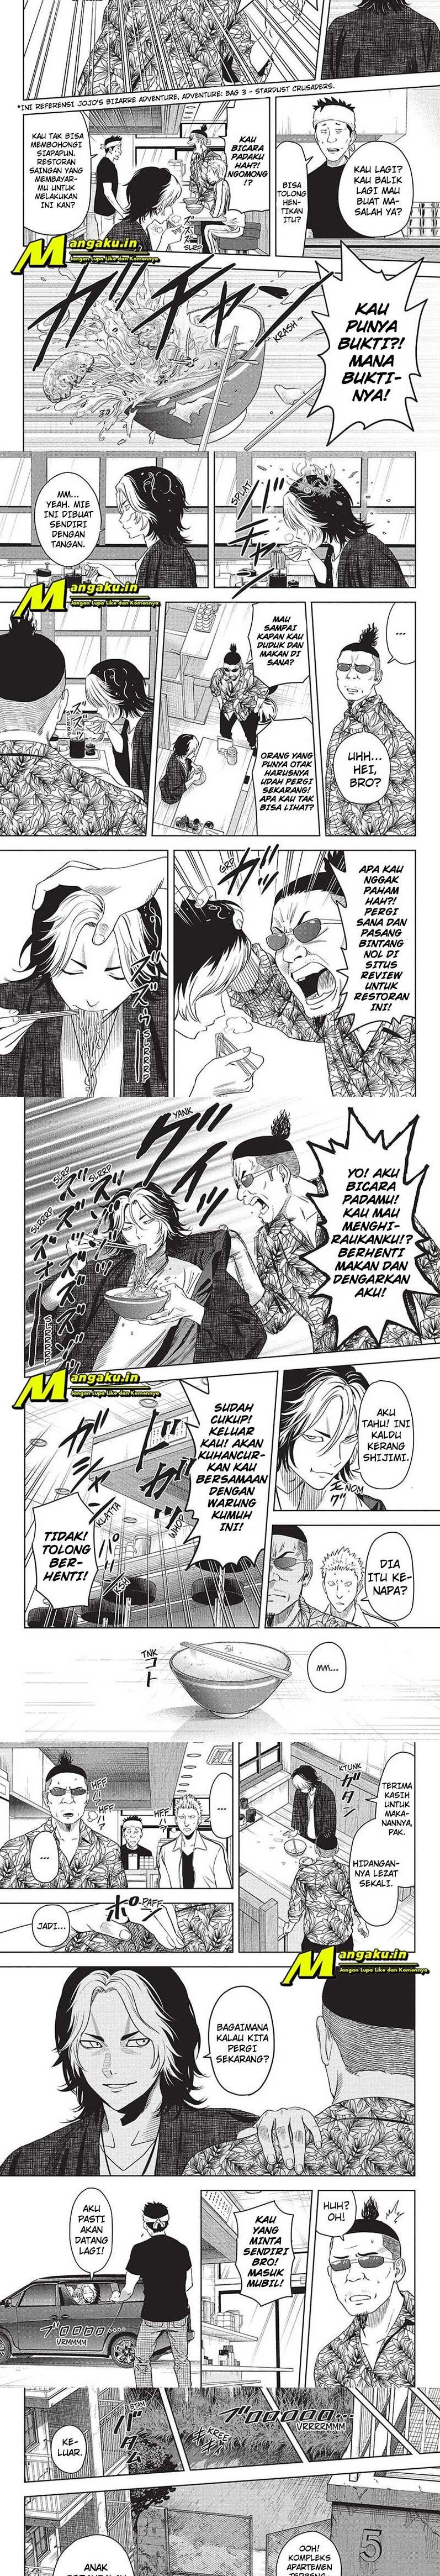 Witch Watch Chapter 82 Bahasa Indonesia